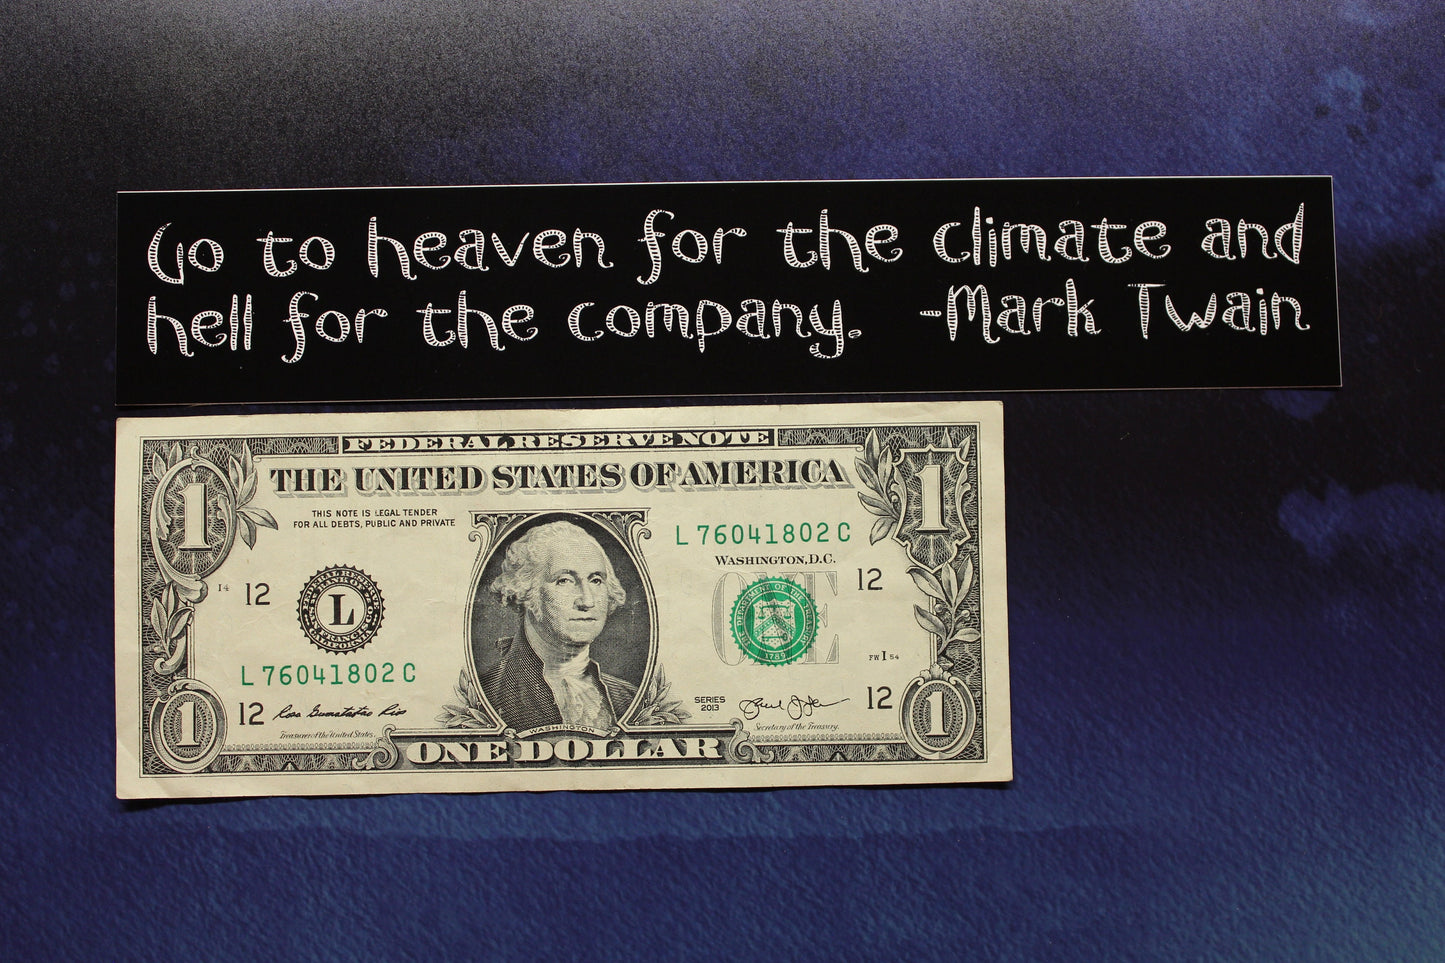 Mark Twain Go to heaven for the climate and hell for the company Vinyl Bumper Sticker car bike laptop guitar